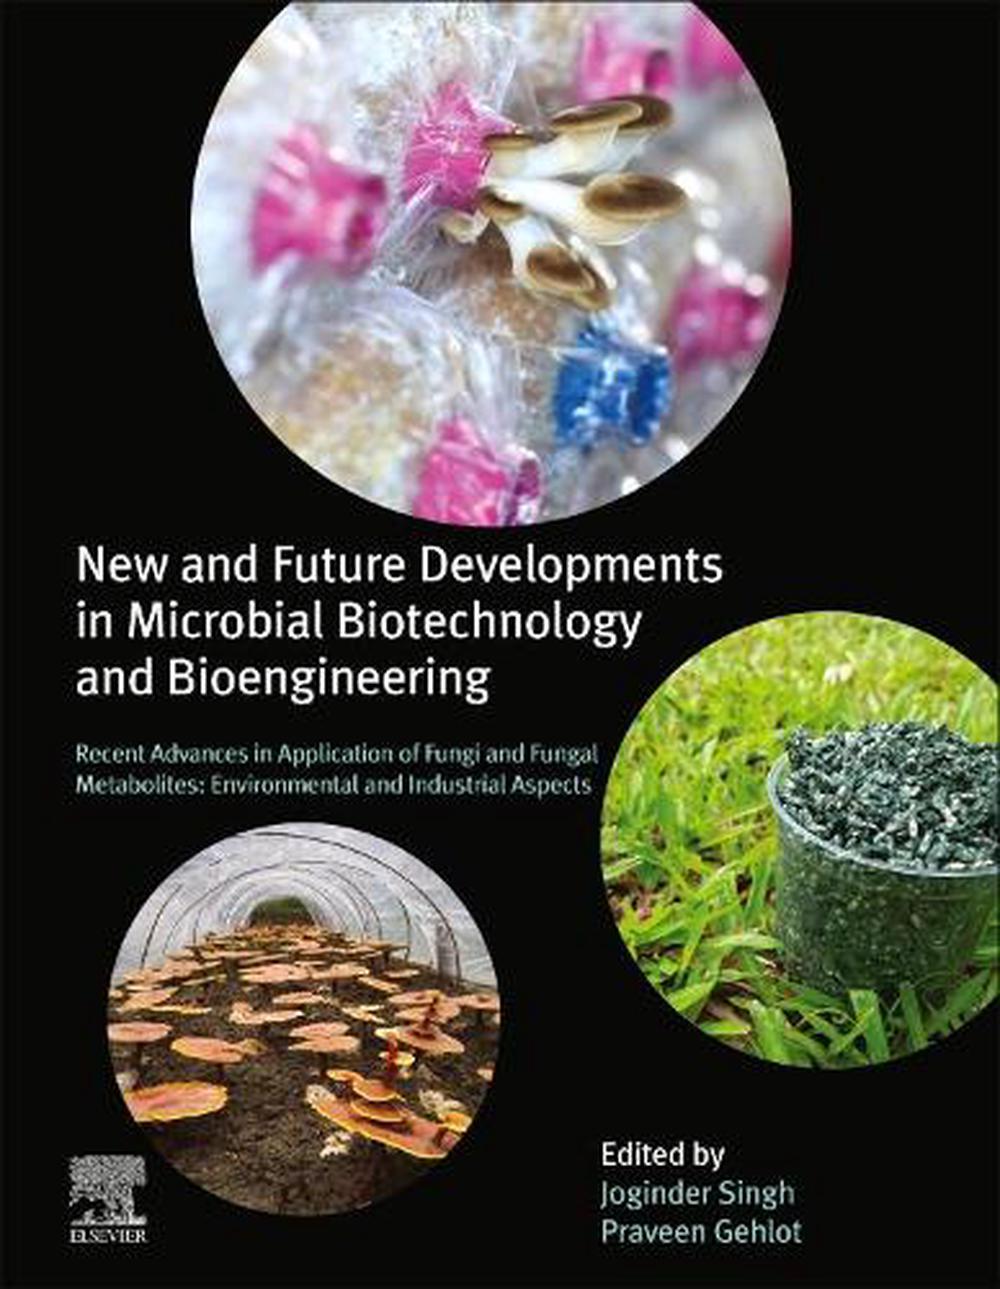 New and Future Developments in Microbial Biotechnology and